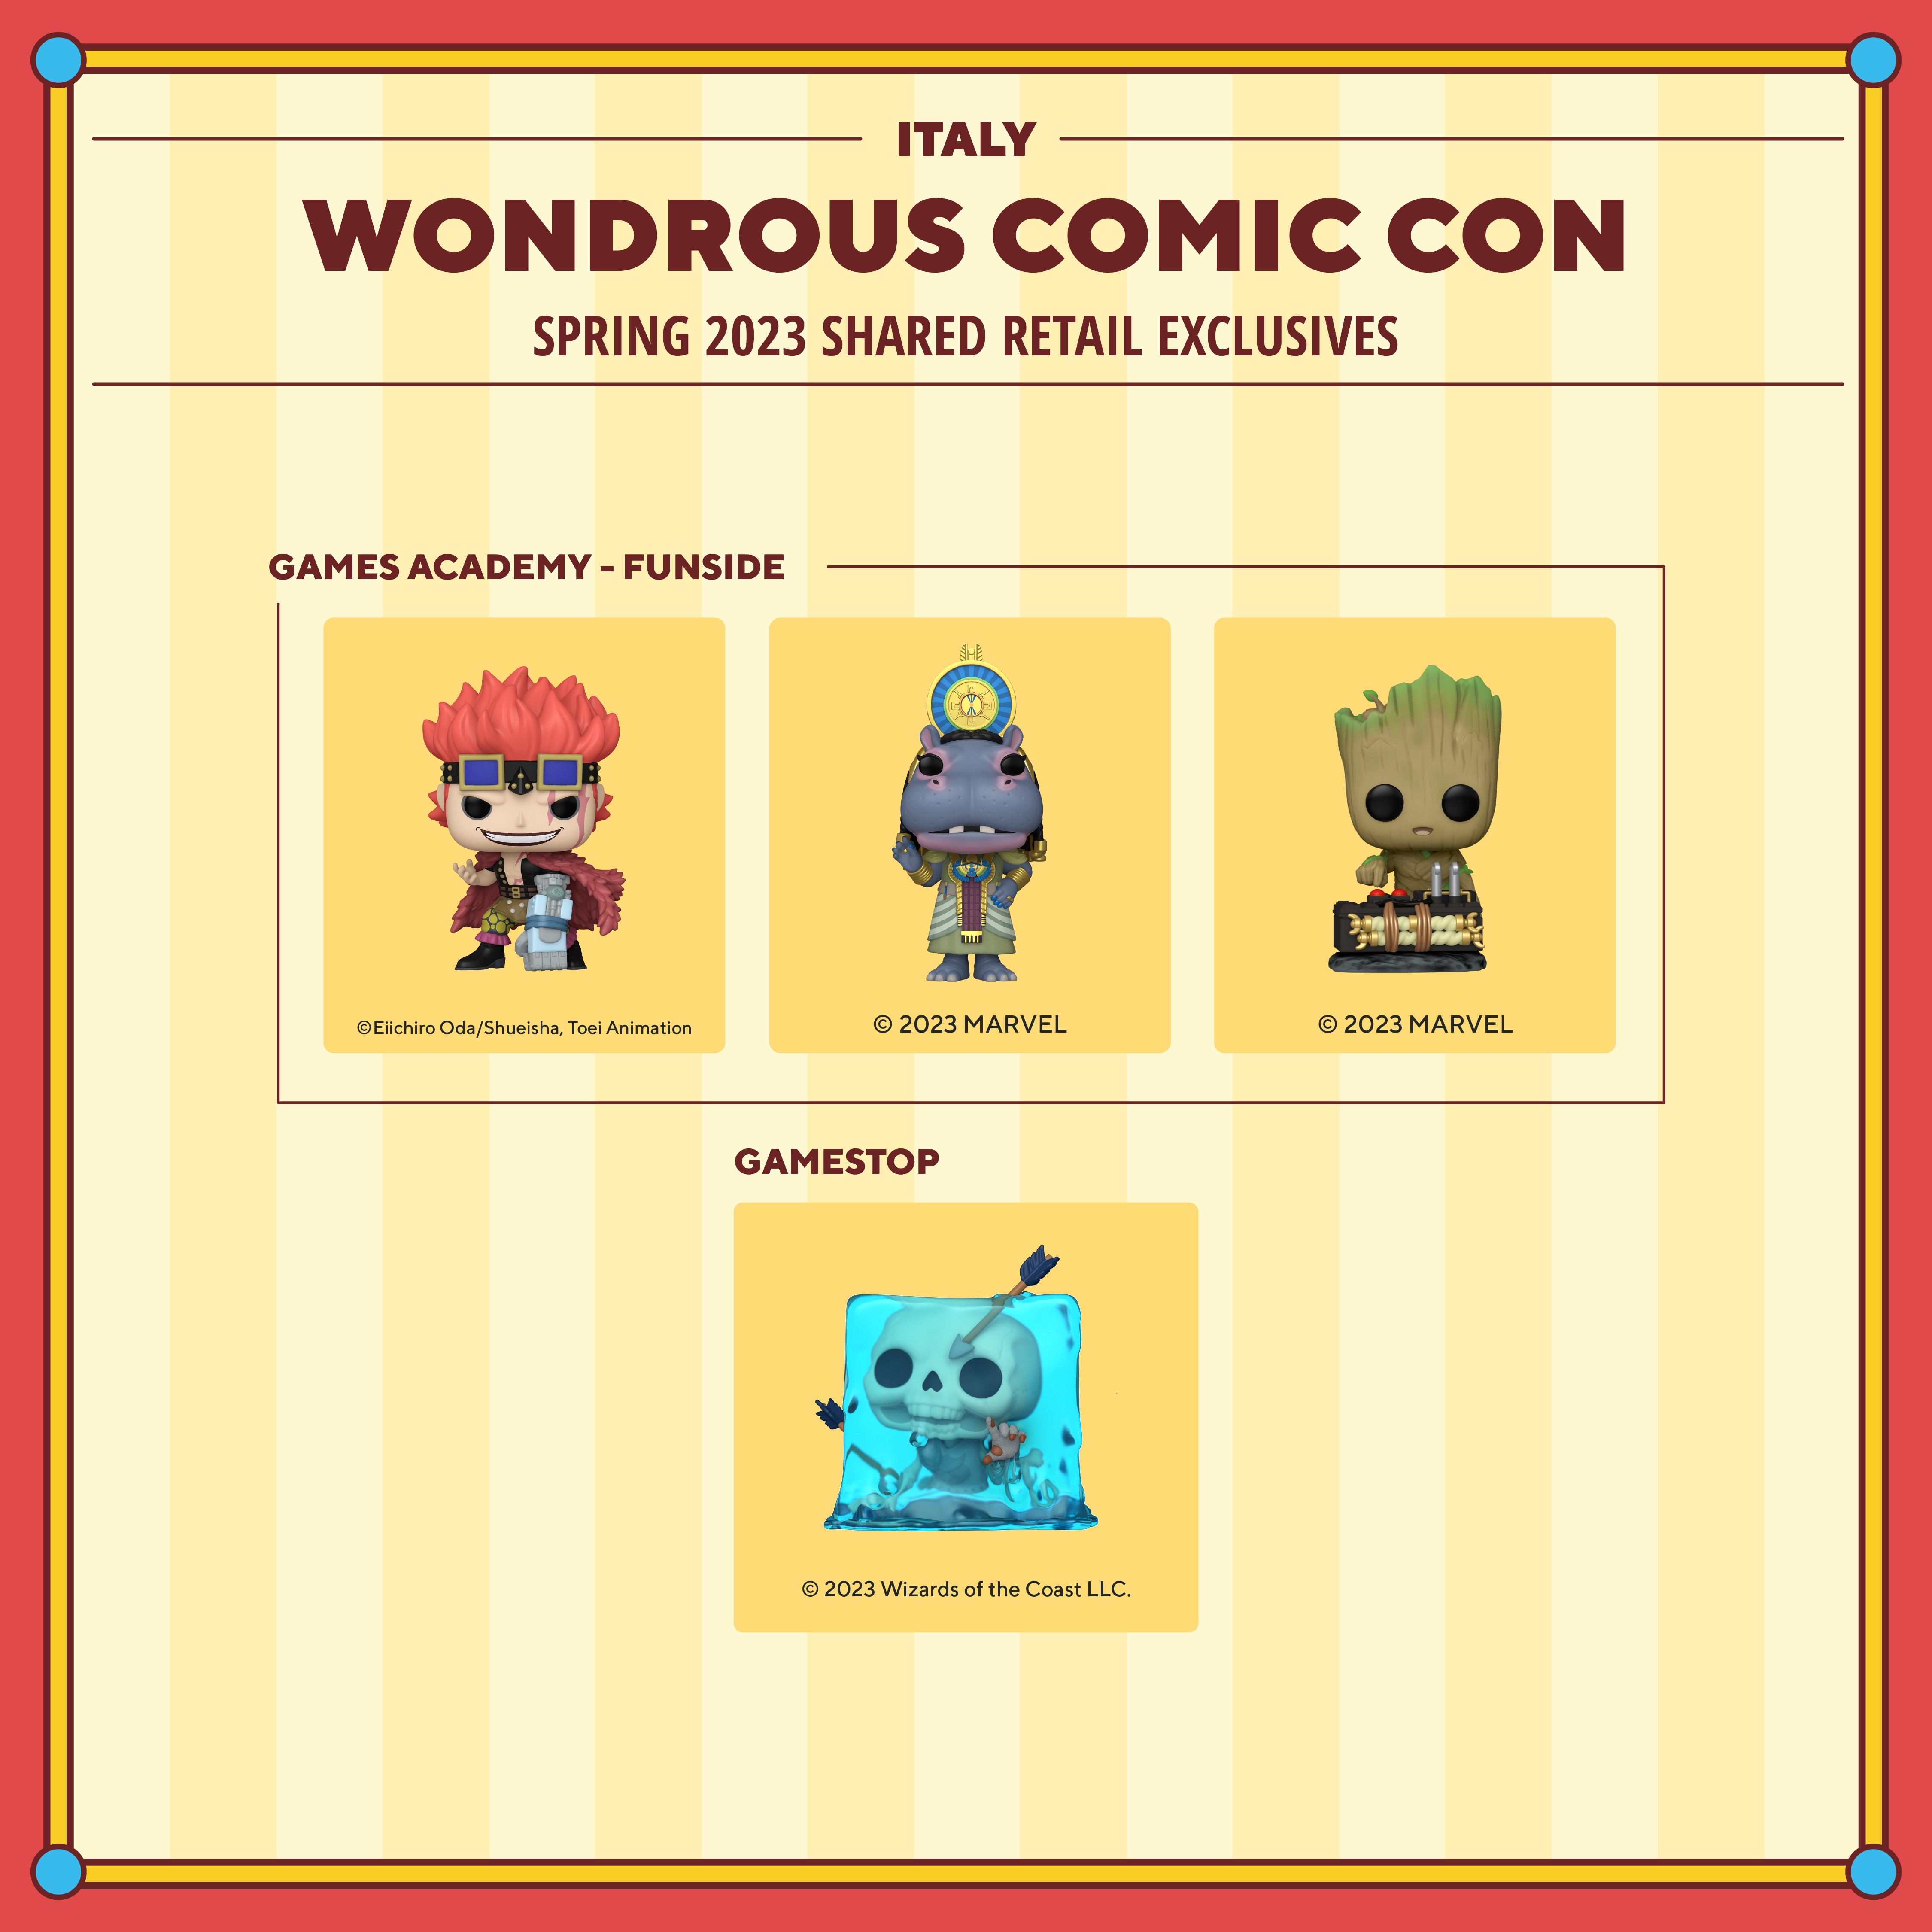 2023 WonderCon Italy Spring shared retail exclusives. Games Academy - Funside exclusives include: Pop! Eustass Kid, Pop! Taweret, and Pop! Baby Groot with Detonator. GameStop exclusives include: Pop! Gelatinous Cube.